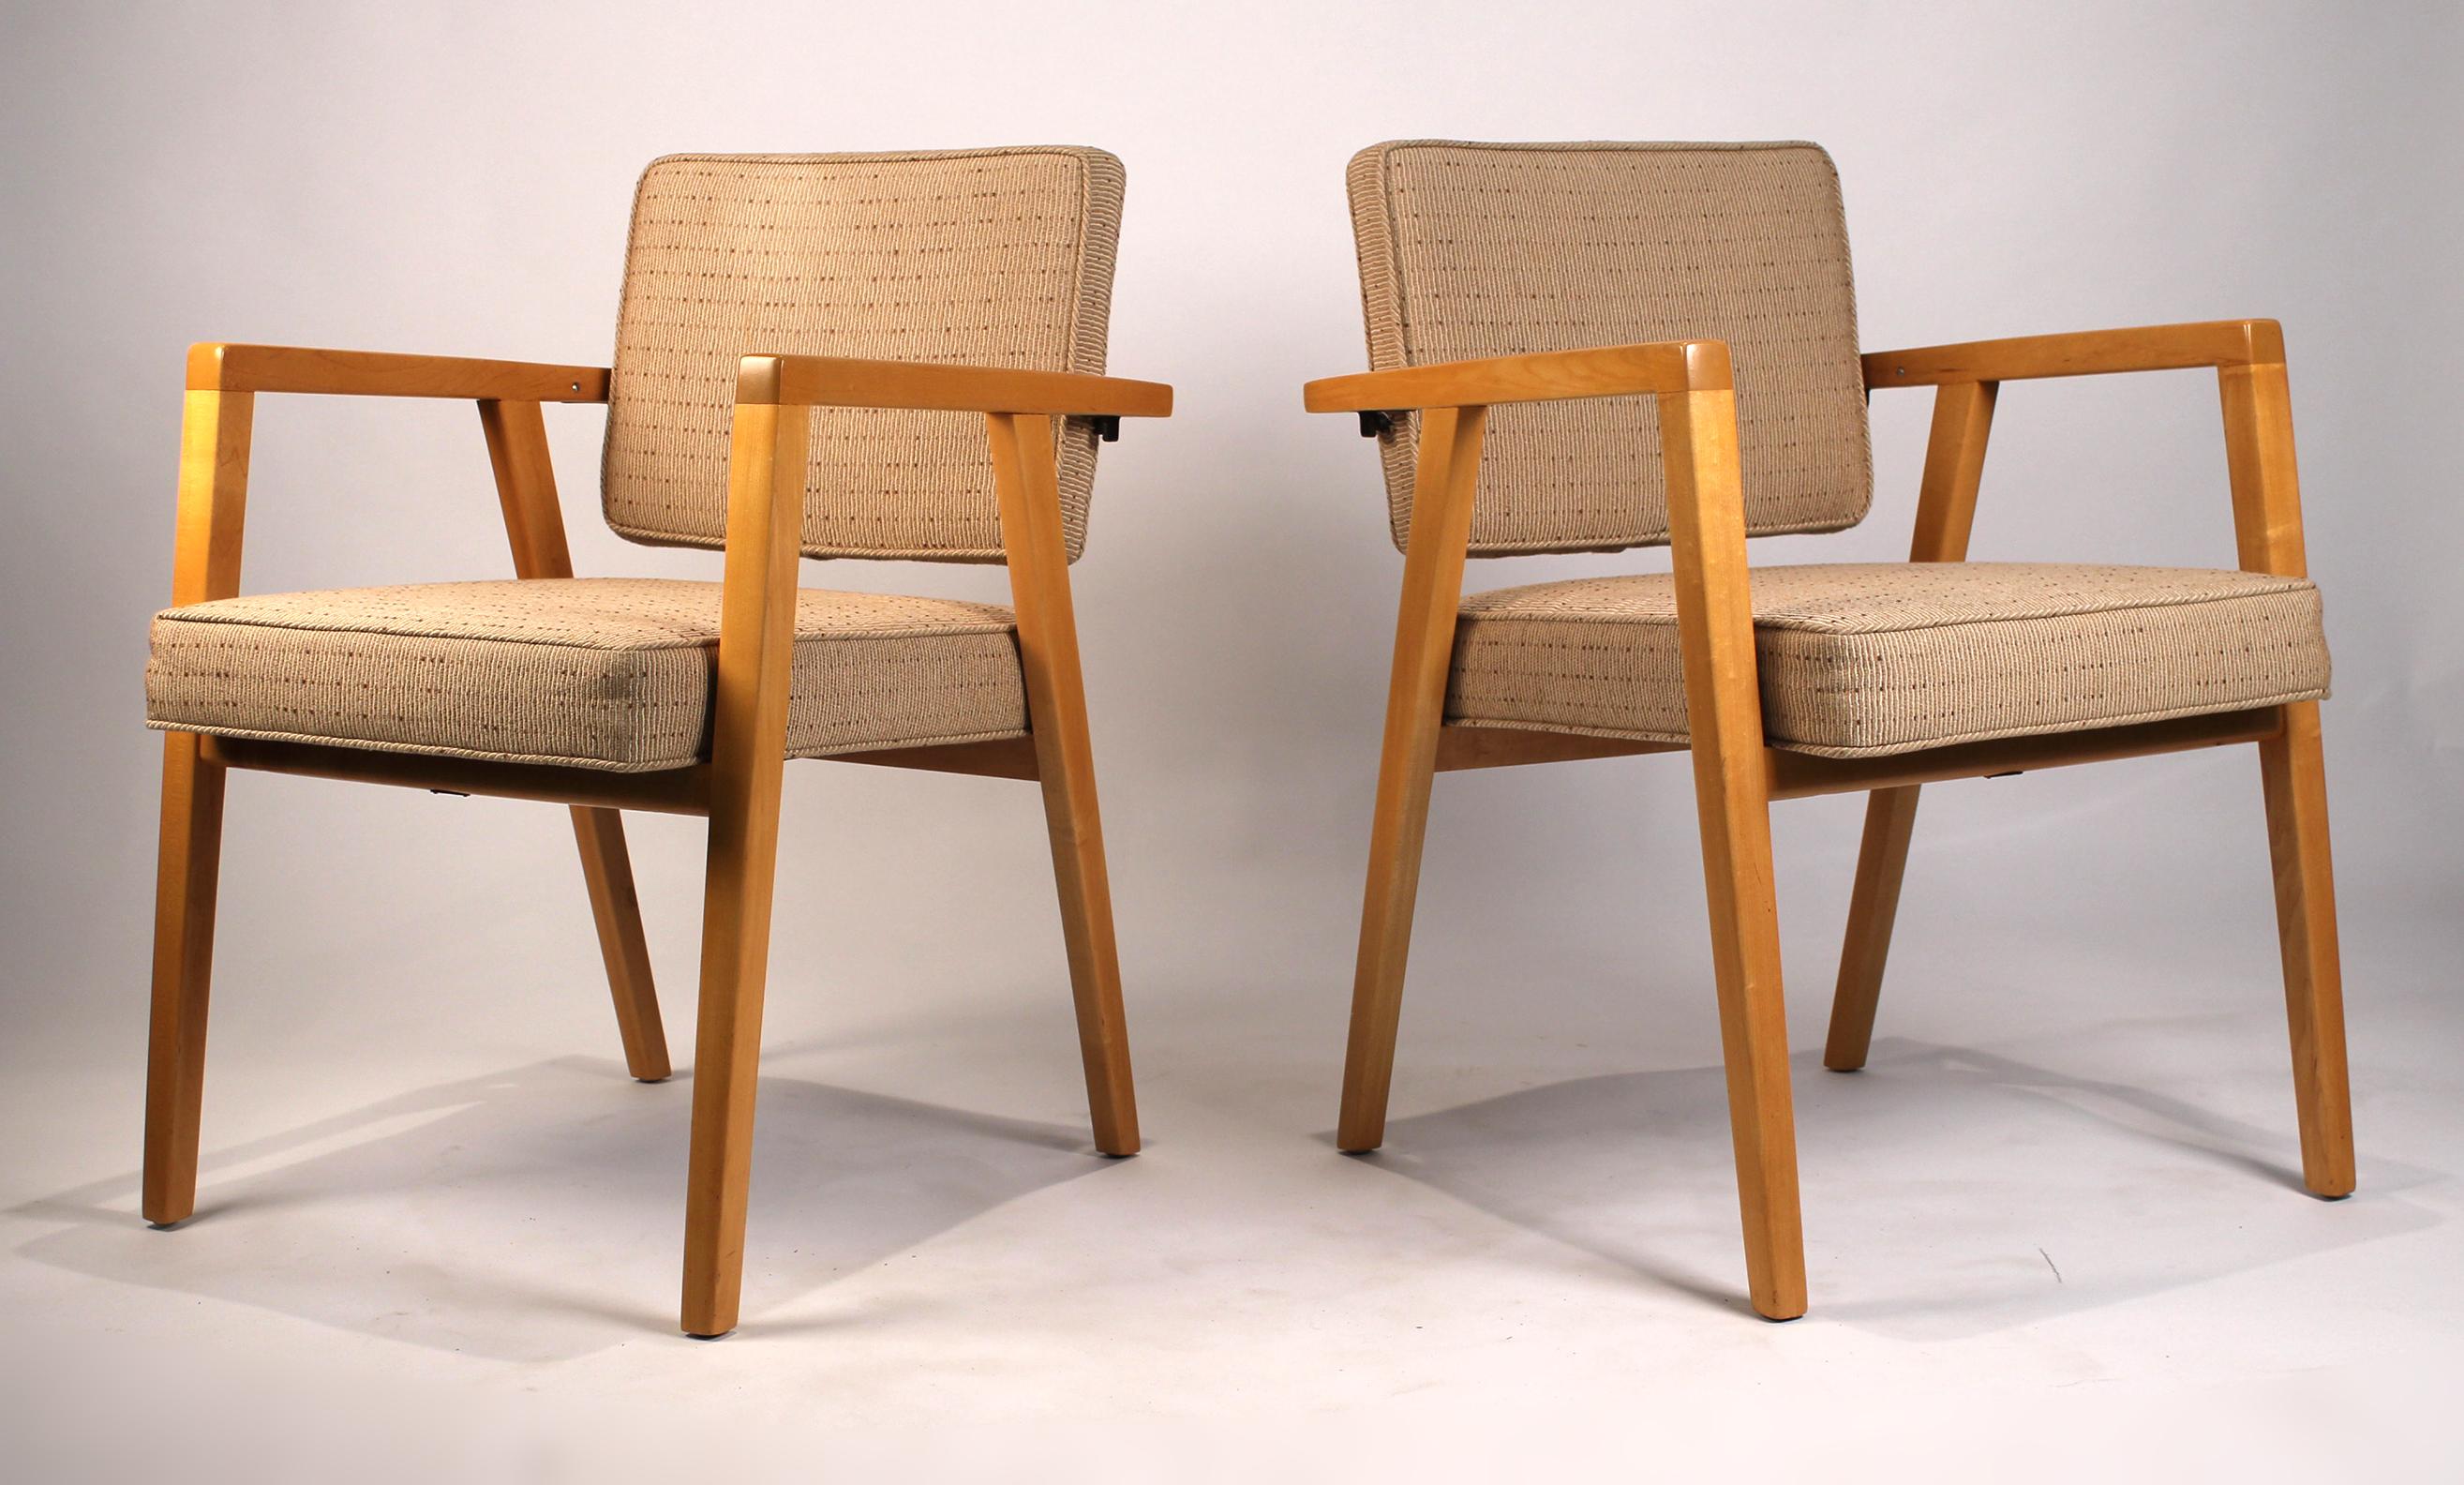 From the estate of a local architect, this set of ten Franco Albini dining chairs was produced by Knoll and is quite rare to see in a such an impressive number. New foam, new lacquer on the maple and new Knoll fabric. These chairs are ready for